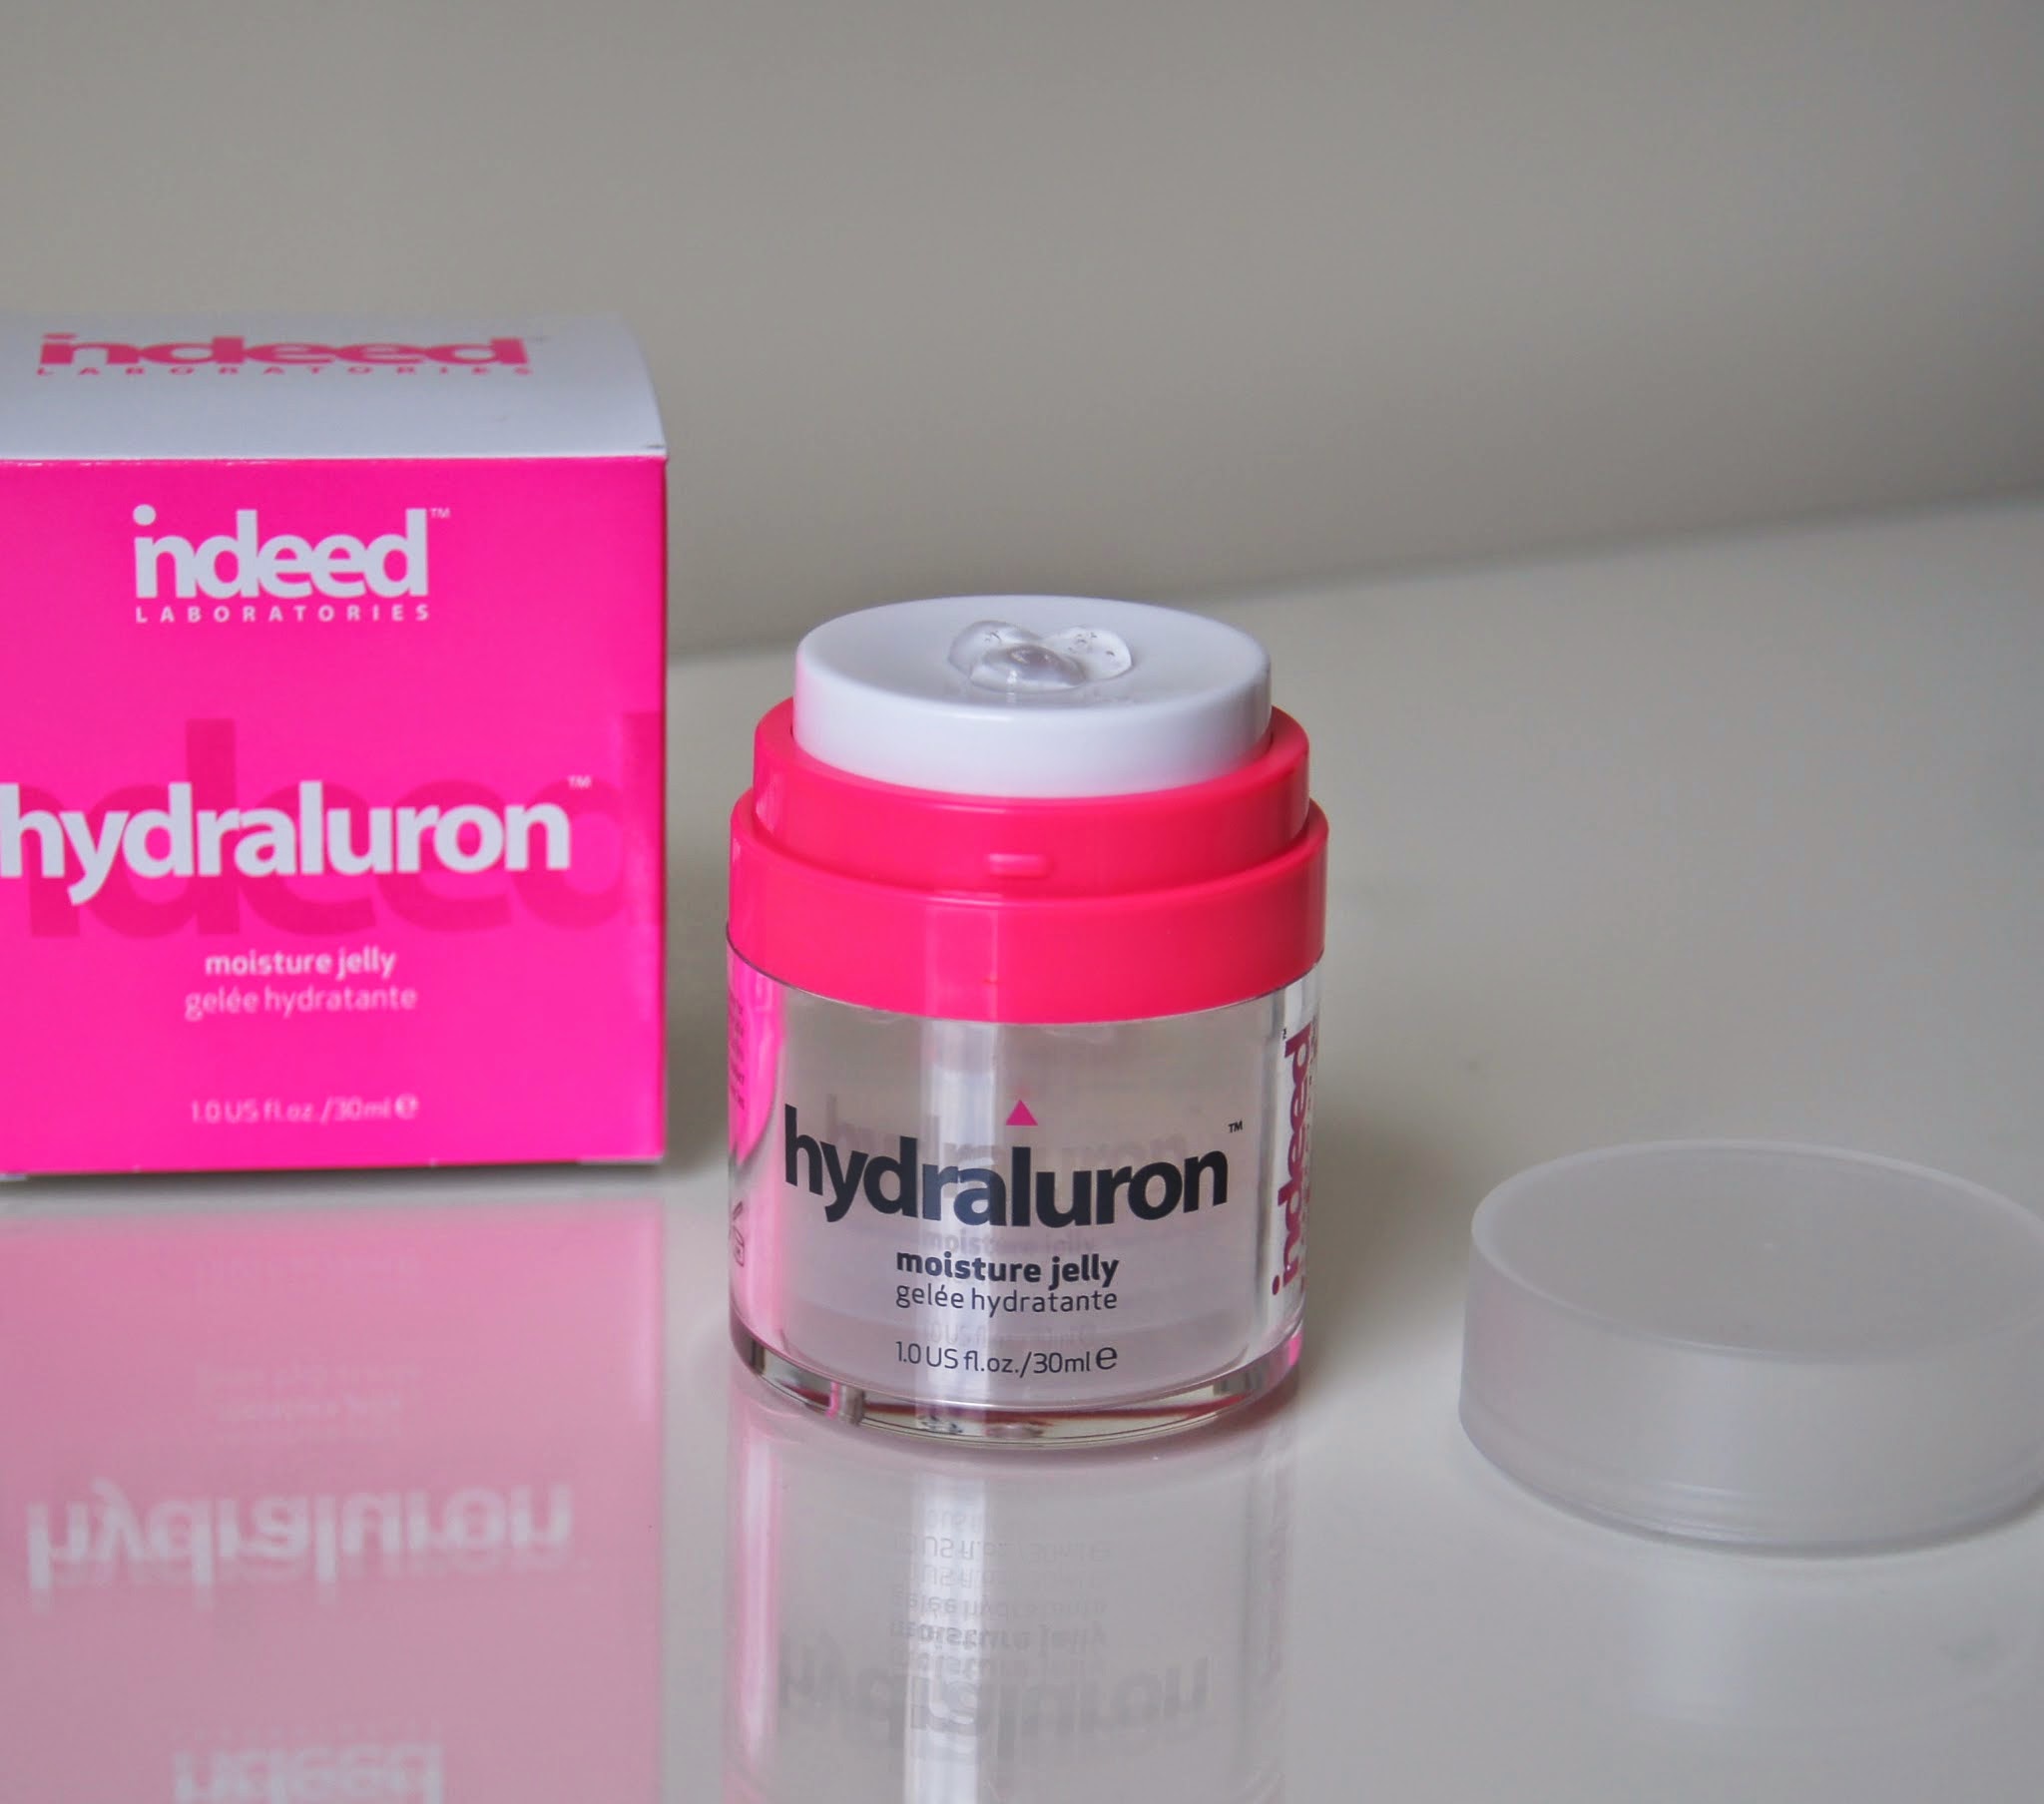 indeed labs skincare hydraluron moisture jelly review